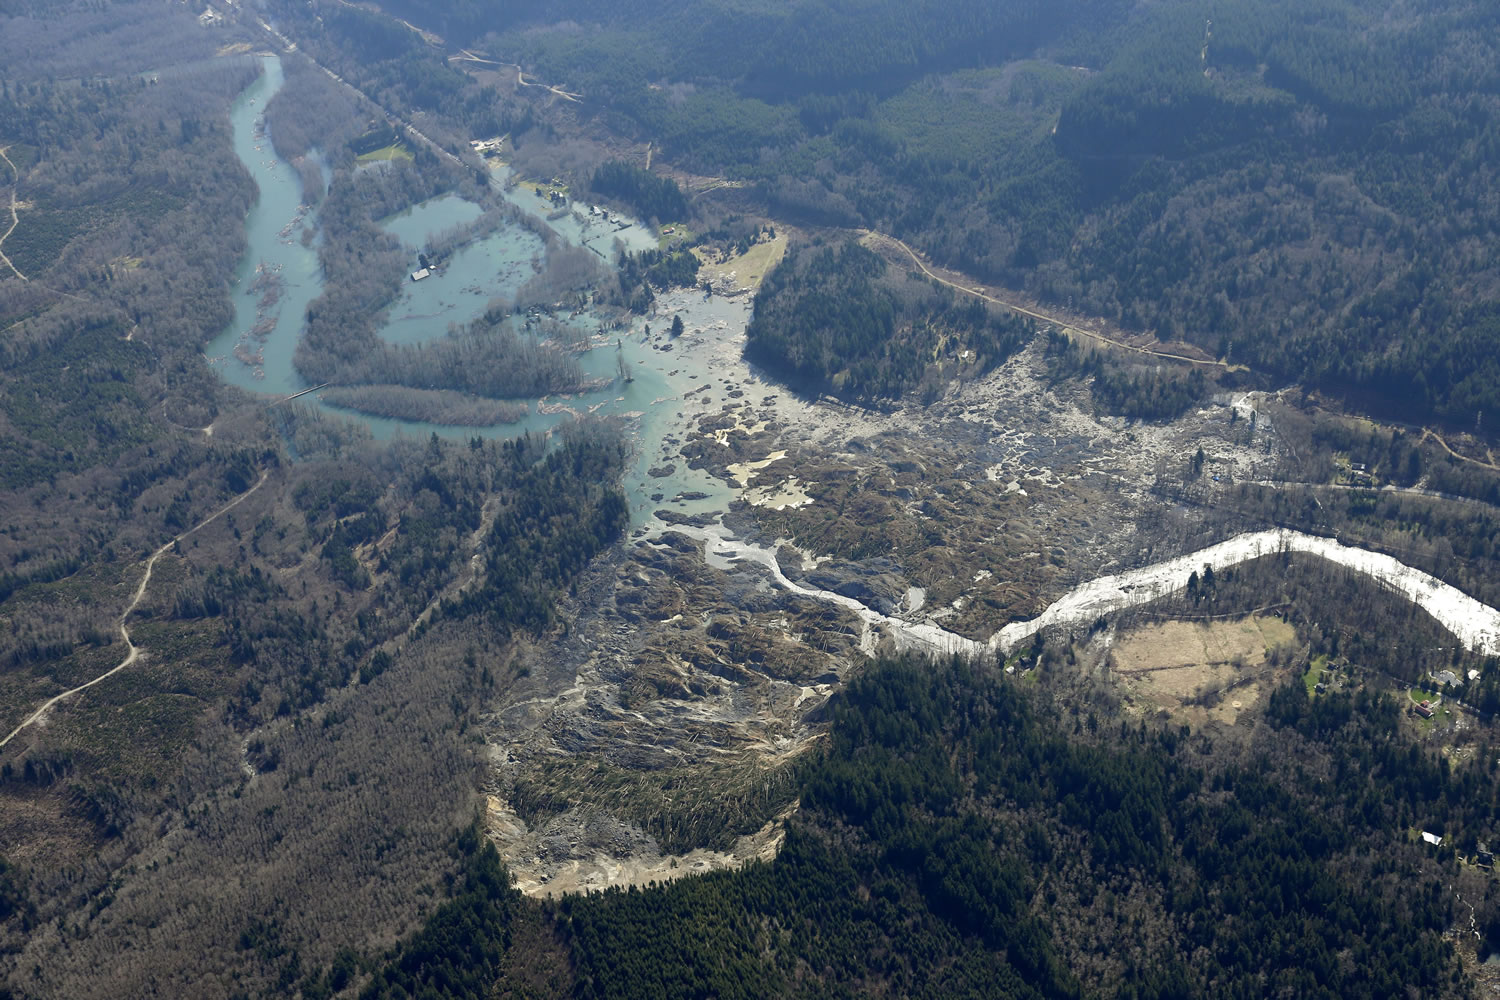 The Stillaguamish River is shown backed up at left in this aerial photo Monday near Arlington after it was blocked on Saturday by the massive mudslide shown at center, that killed at least eight people and left dozens missing, The search for survivors grew Monday raising fears that the death toll could climb far beyond the eight confirmed fatalities.